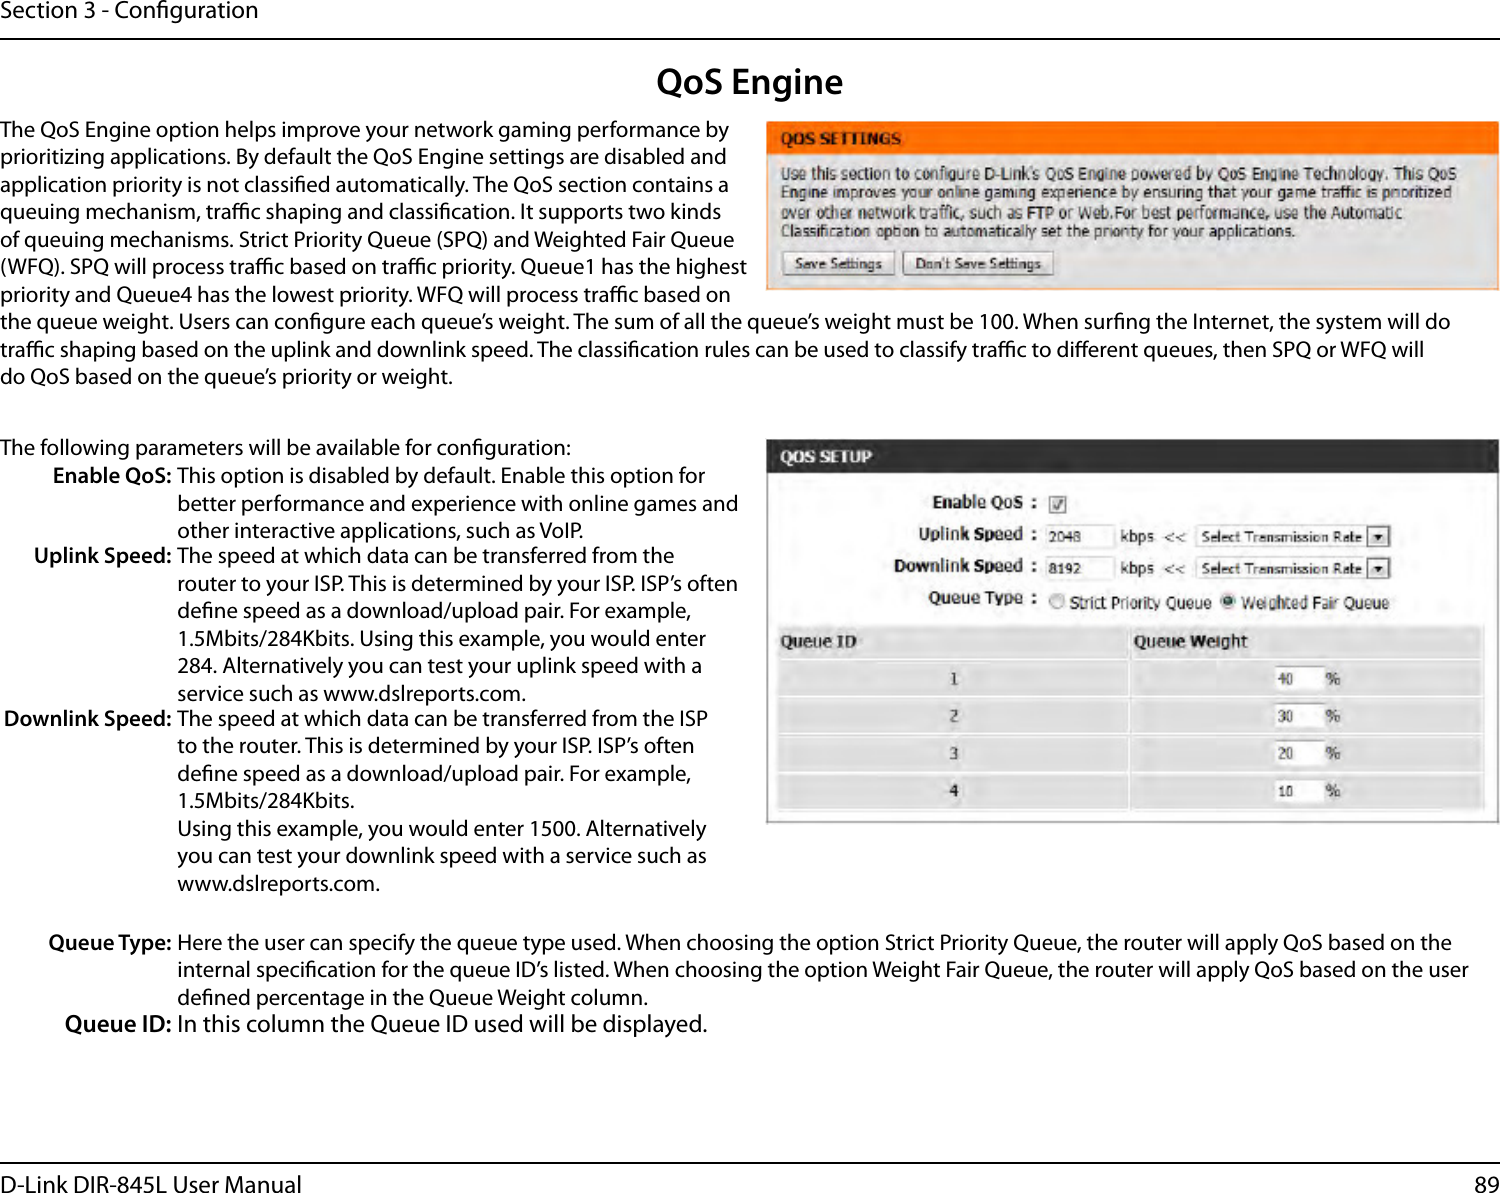 89D-Link DIR-845L User ManualSection 3 - CongurationQoS EngineThe QoS Engine option helps improve your network gaming performance by prioritizing applications. By default the QoS Engine settings are disabled and application priority is not classied automatically. The QoS section contains a queuing mechanism, trac shaping and classication. It supports two kinds of queuing mechanisms. Strict Priority Queue (SPQ) and Weighted Fair Queue (WFQ). SPQ will process trac based on trac priority. Queue1 has the highest priority and Queue4 has the lowest priority. WFQ will process trac based on the queue weight. Users can congure each queue’s weight. The sum of all the queue’s weight must be 100. When surng the Internet, the system will do trac shaping based on the uplink and downlink speed. The classication rules can be used to classify trac to dierent queues, then SPQ or WFQ will do QoS based on the queue’s priority or weight.The following parameters will be available for conguration:Enable QoS: This option is disabled by default. Enable this option for better performance and experience with online games and other interactive applications, such as VoIP.Uplink Speed: The speed at which data can be transferred from the router to your ISP. This is determined by your ISP. ISP’s often dene speed as a download/upload pair. For example, 1.5Mbits/284Kbits. Using this example, you would enter 284. Alternatively you can test your uplink speed with a service such as www.dslreports.com.Downlink Speed: The speed at which data can be transferred from the ISP to the router. This is determined by your ISP. ISP’s often dene speed as a download/upload pair. For example, 1.5Mbits/284Kbits. Using this example, you would enter 1500. Alternatively you can test your downlink speed with a service such as www.dslreports.com.Queue Type: Here the user can specify the queue type used. When choosing the option Strict Priority Queue, the router will apply QoS based on the internal specication for the queue ID’s listed. When choosing the option Weight Fair Queue, the router will apply QoS based on the user dened percentage in the Queue Weight column.Queue ID: In this column the Queue ID used will be displayed.